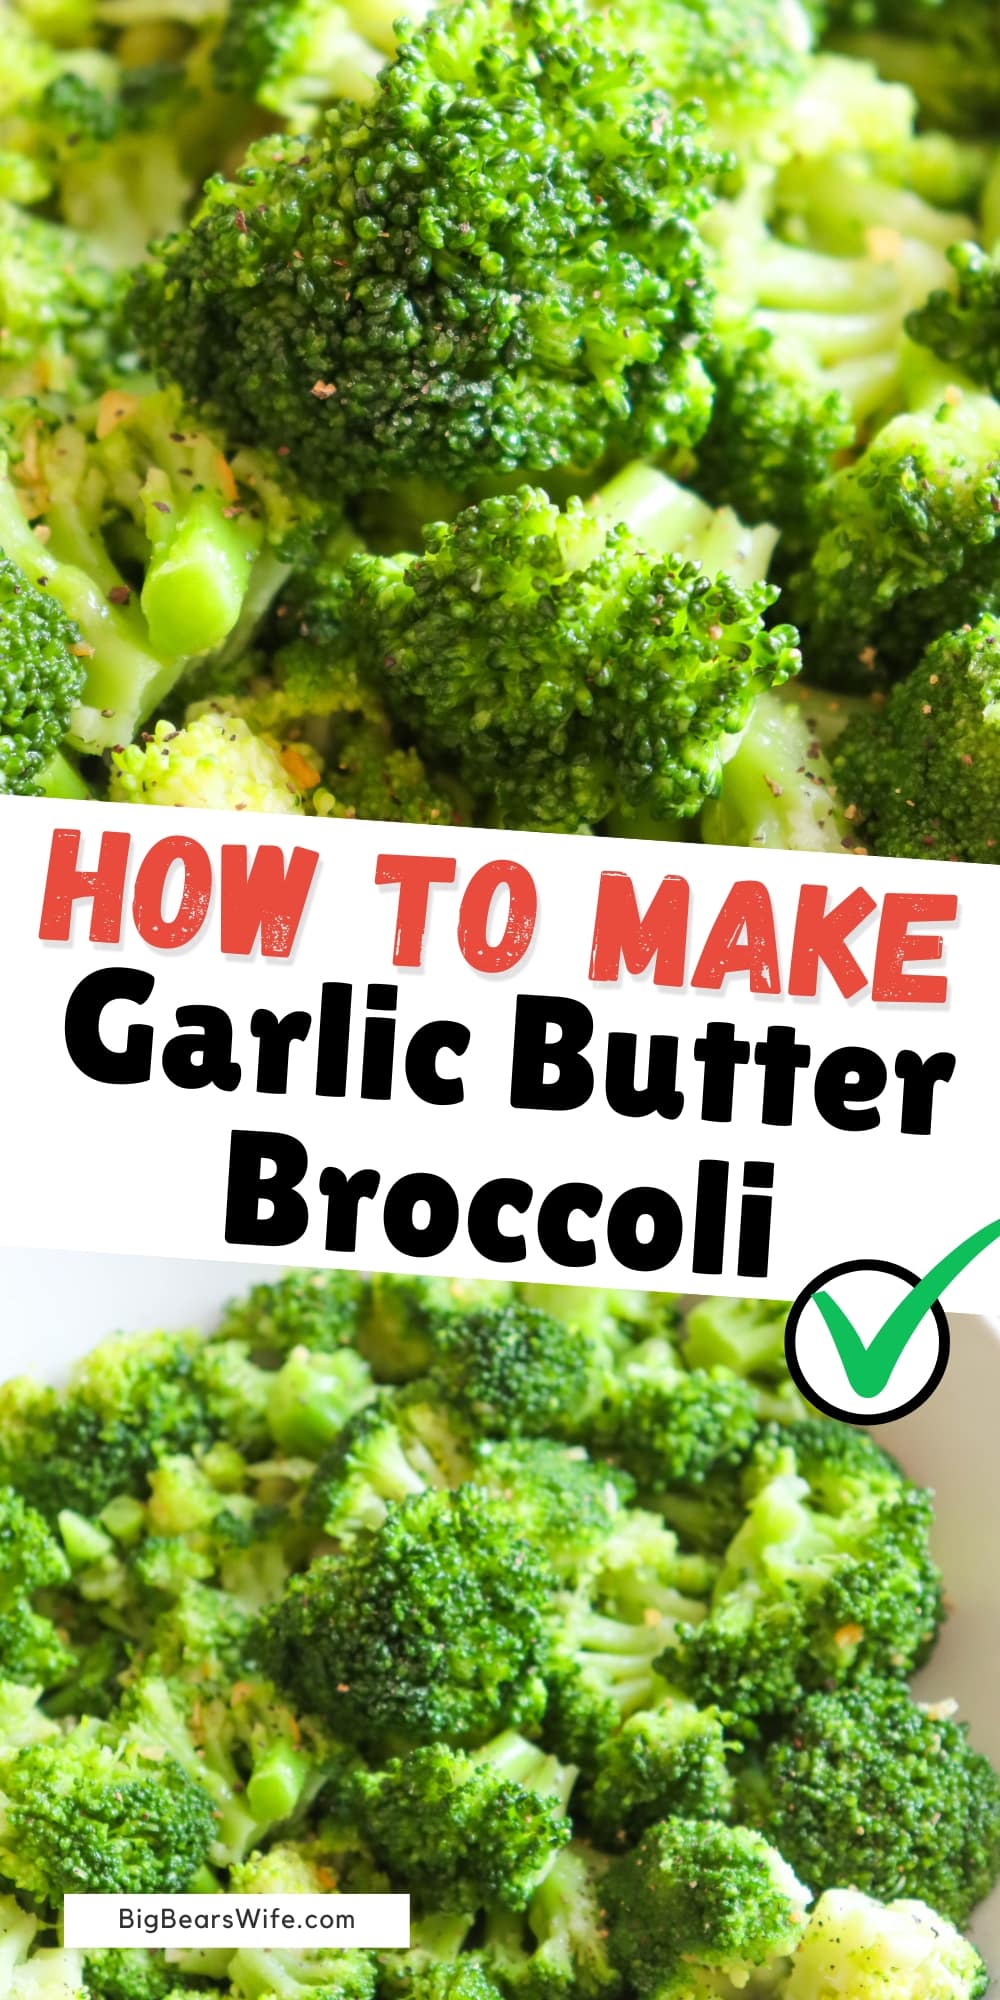 Satisfy your cravings with a tantalizing dish that combines the goodness of broccoli with the heavenly flavors of garlic butter. We'll teach you this simple yet scrumptious recipe that will turn broccoli haters into broccoli lovers. via @bigbearswife